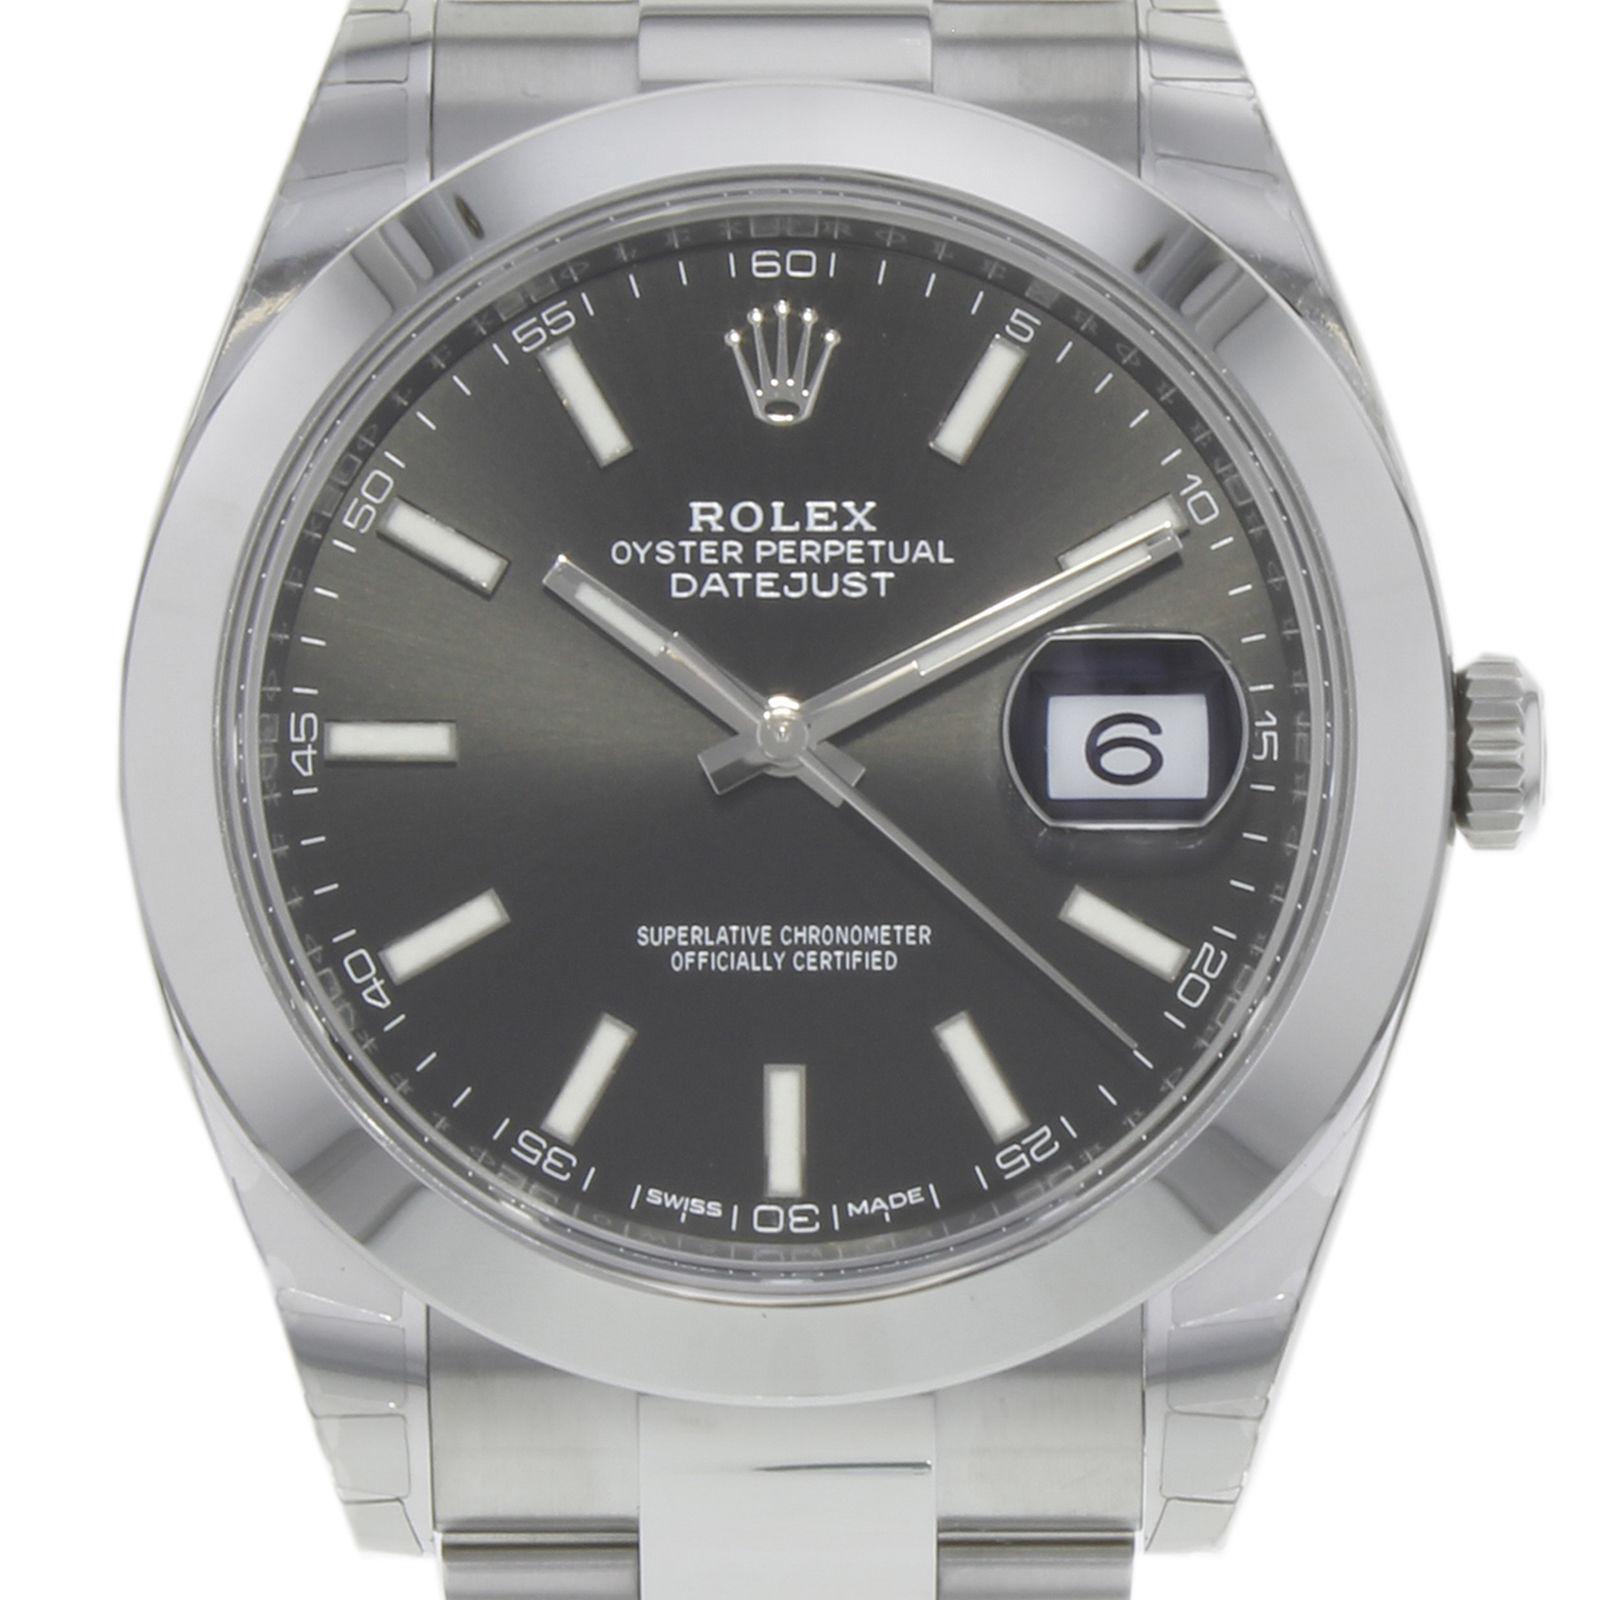 (19543)
This brand new Rolex Datejust 41 126300 bkio is a beautiful men's timepiece that is powered by an automatic movement which is cased in a stainless steel case. It has a round shape face, date dial and has hand sticks style markers. It is